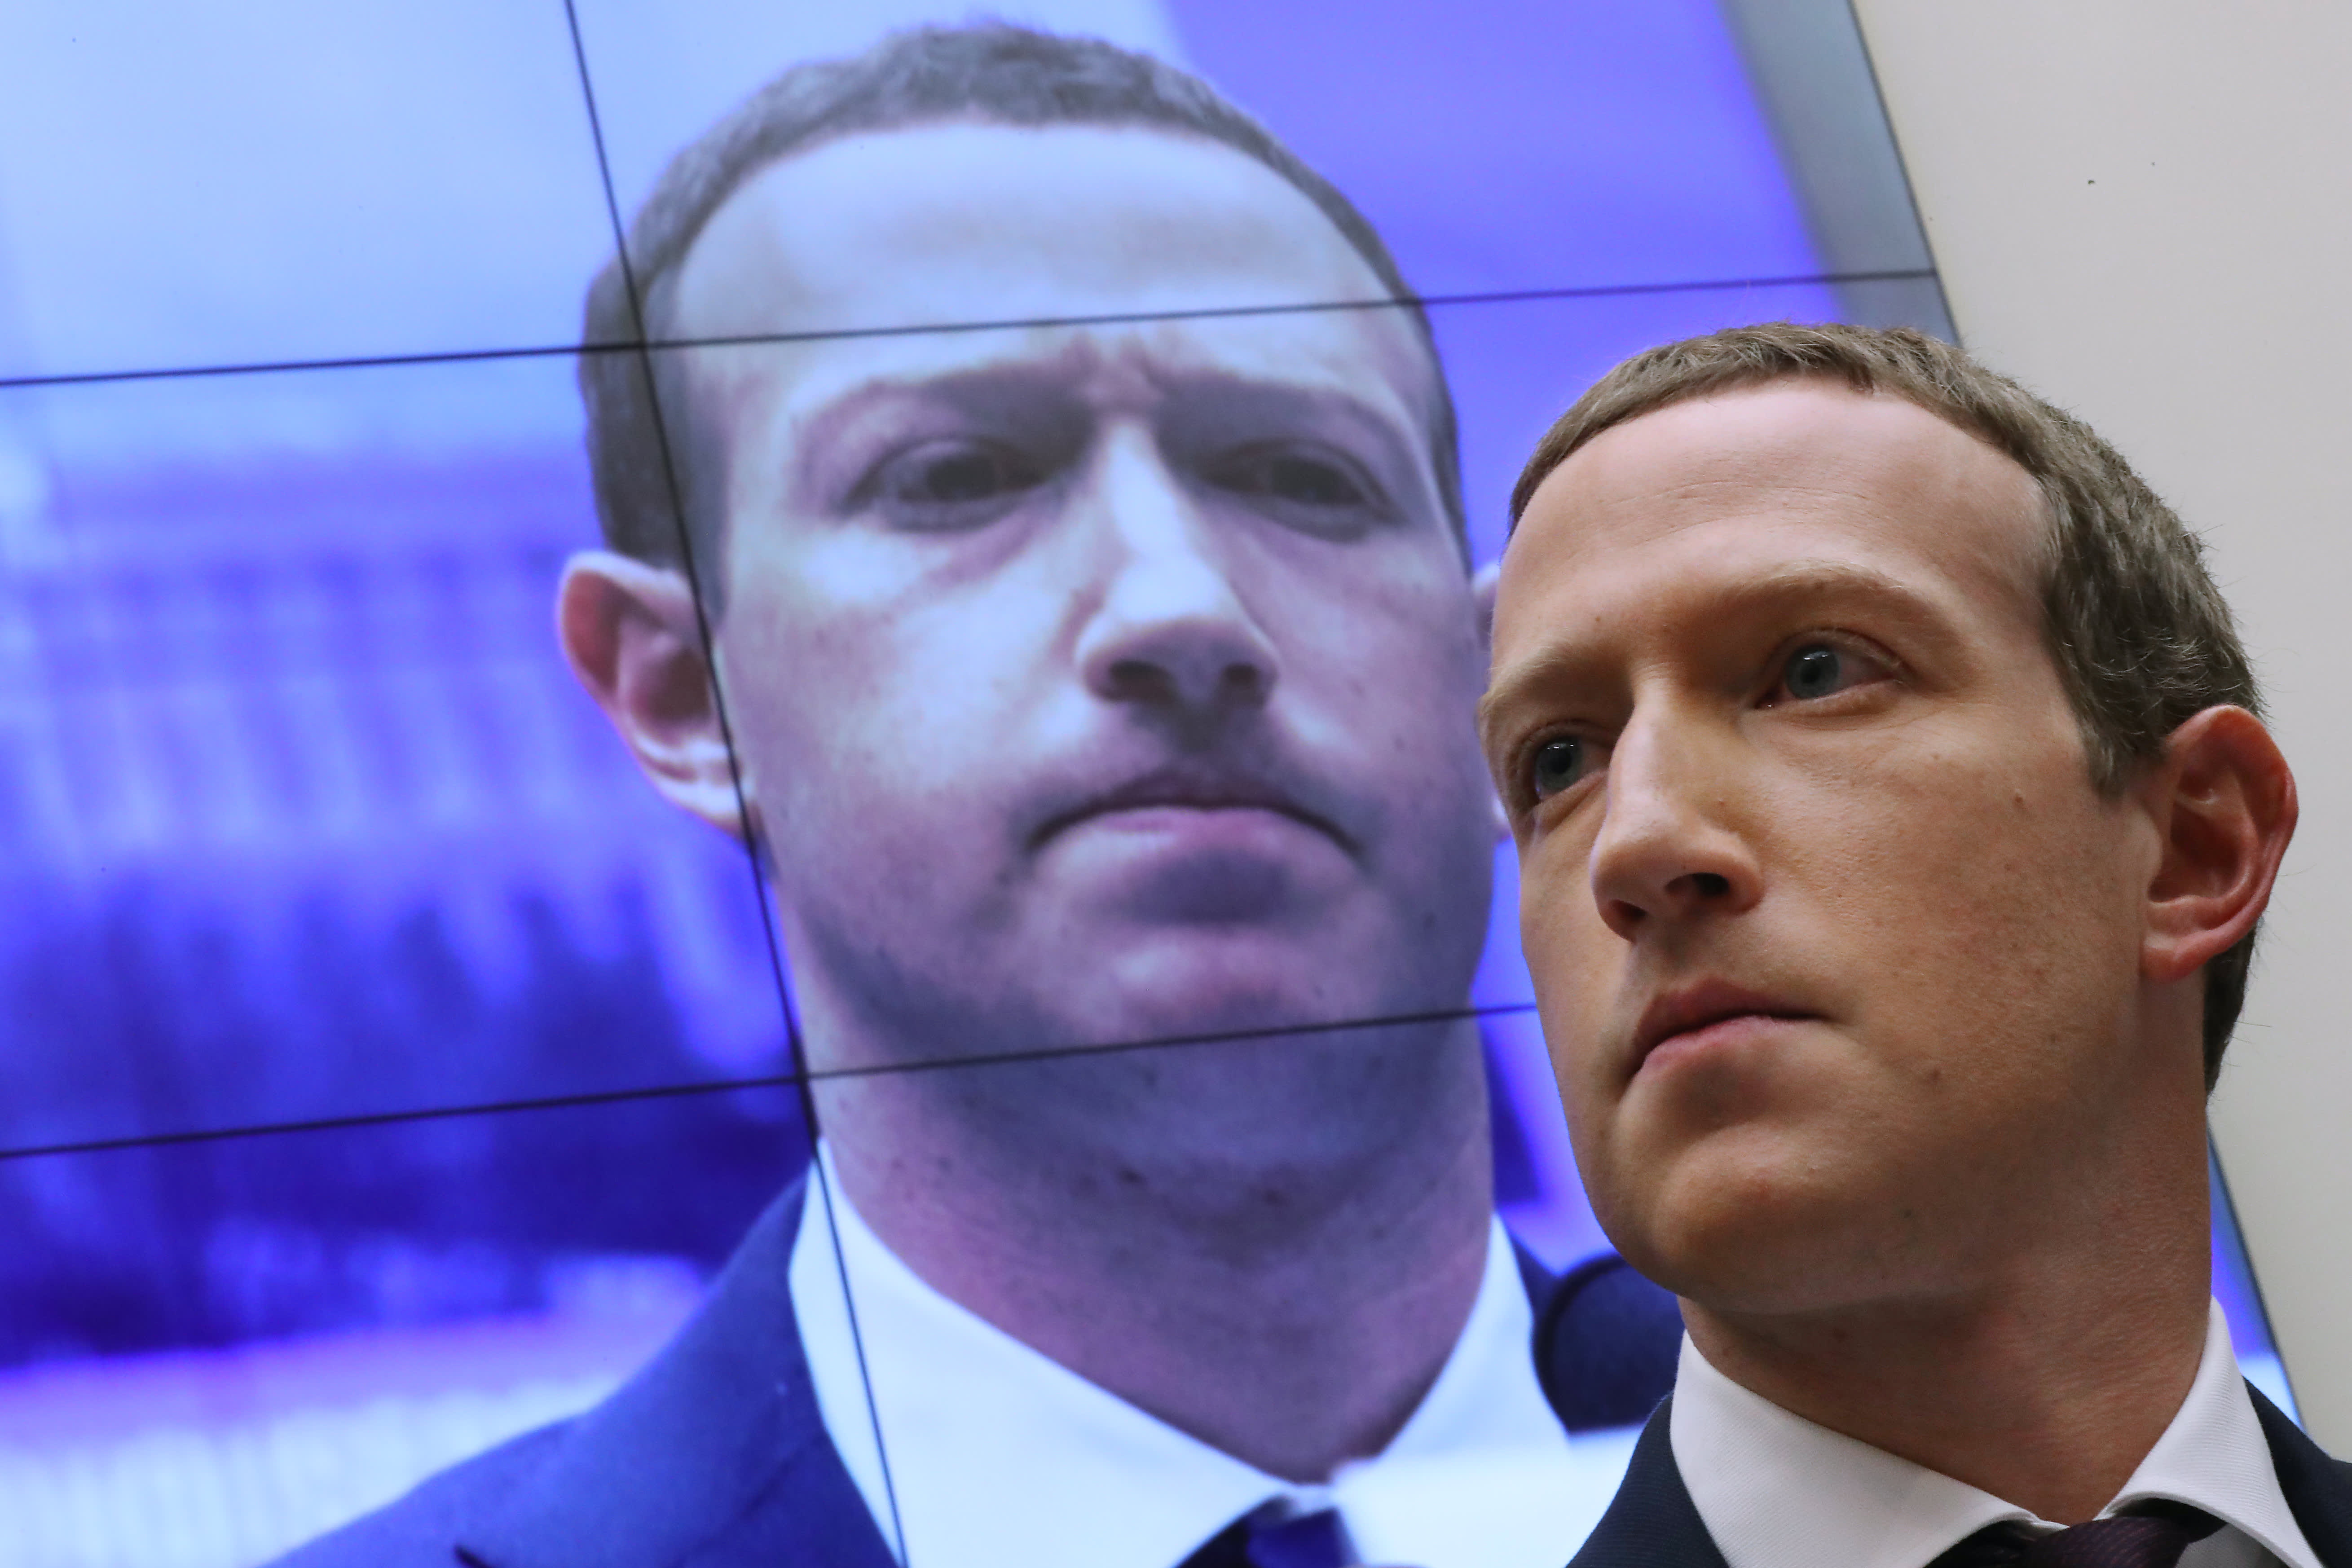 Facebook getting hammered by lawmakers, consumers and even investors